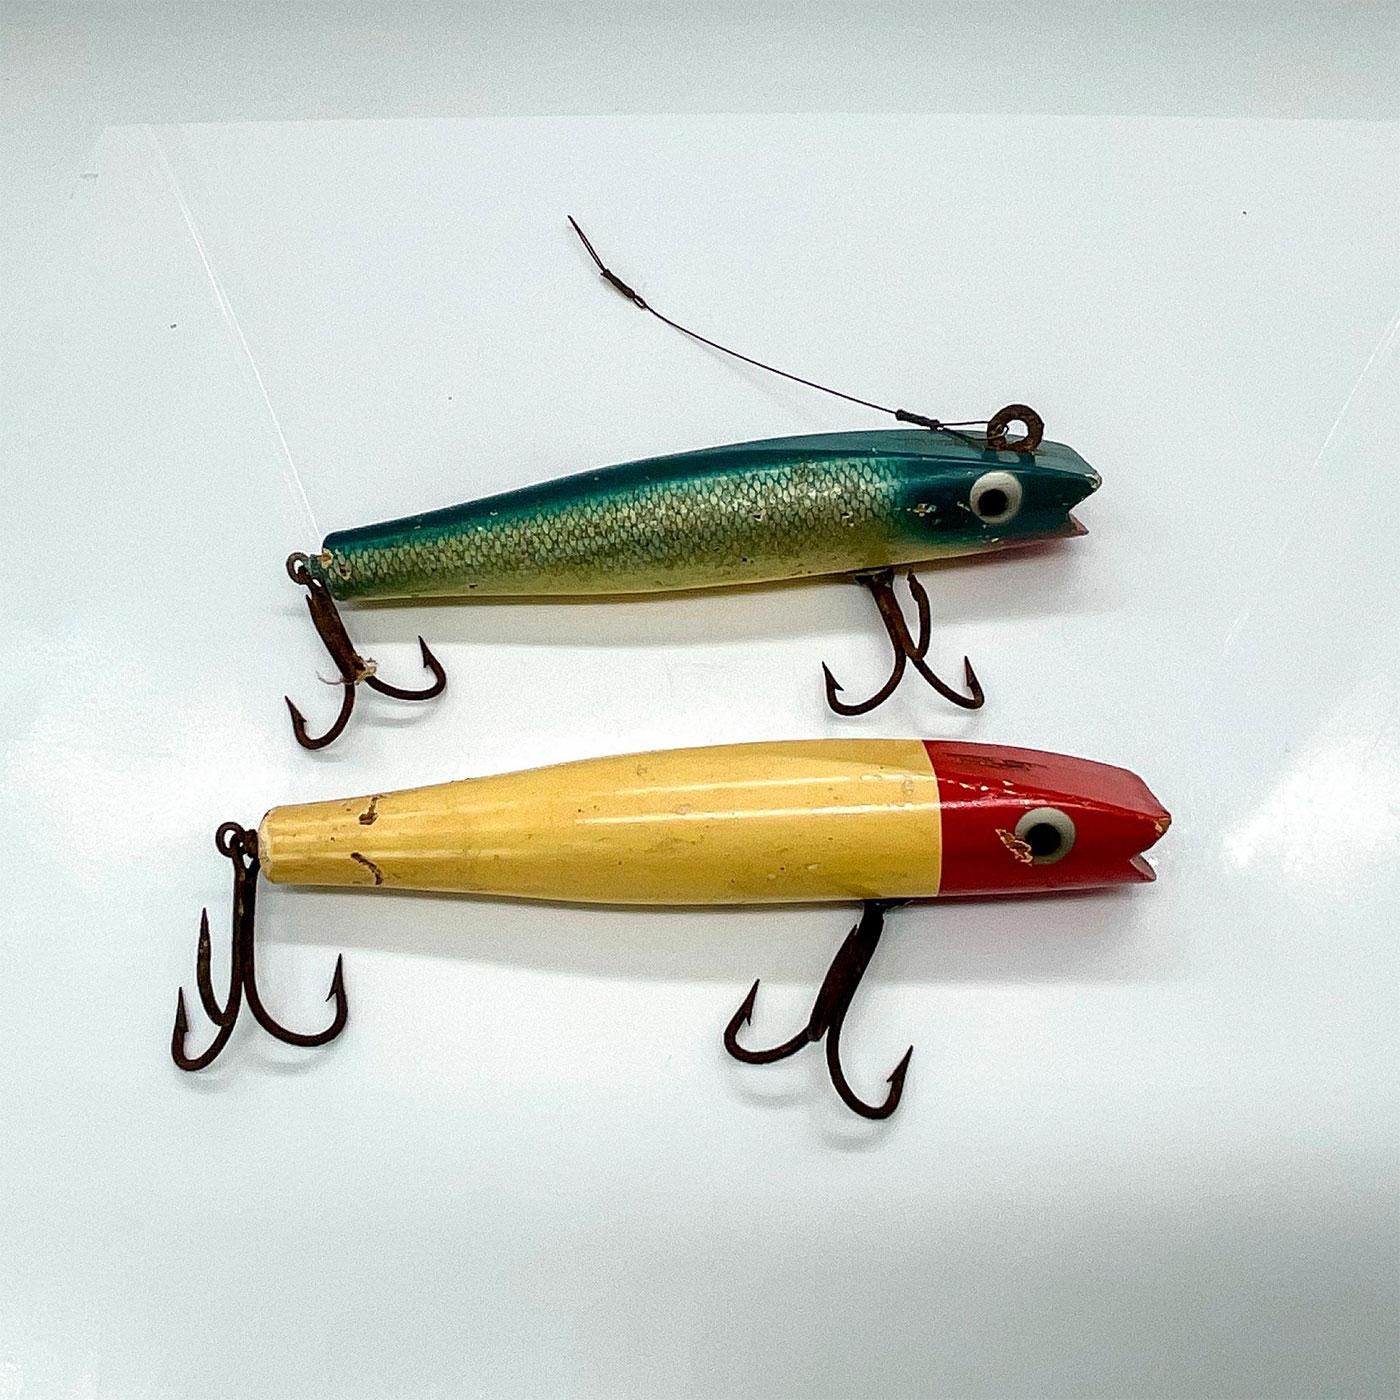 Pair of Creek Chub Darter Lures, Red/White and Blue Flash